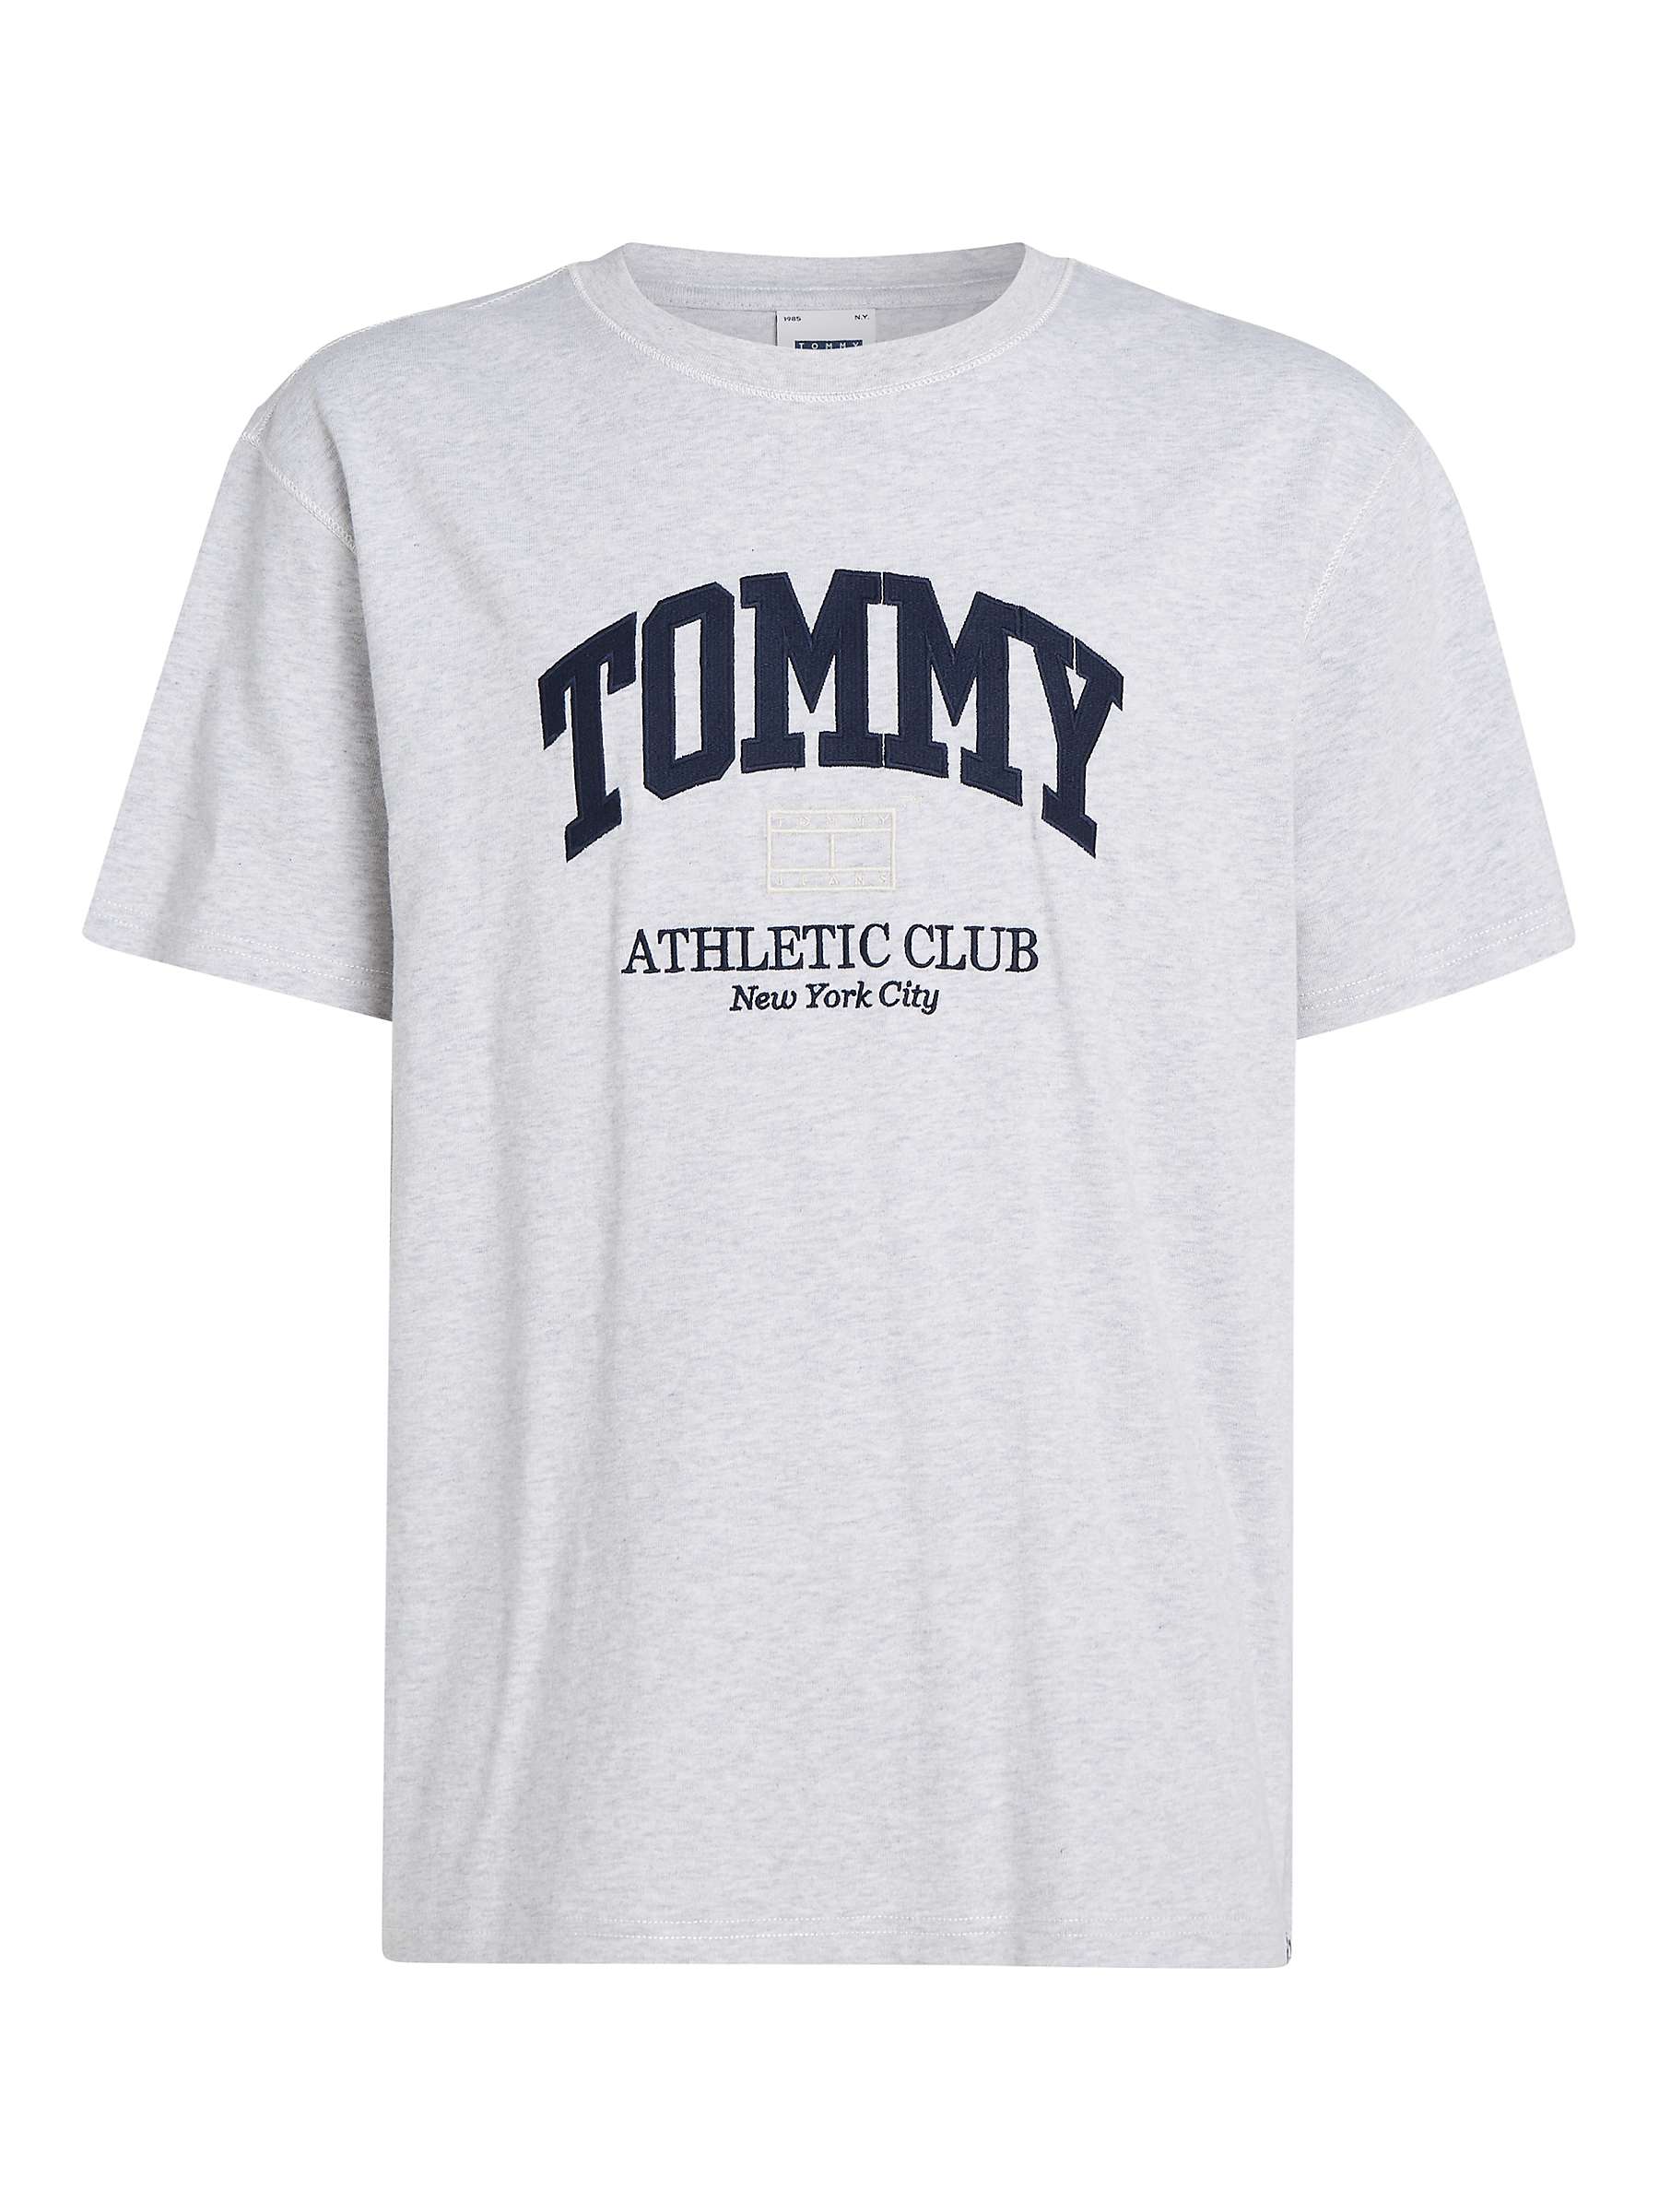 Buy Tommy Jeans Athletic Club T-Shirt, Silver Grey Online at johnlewis.com